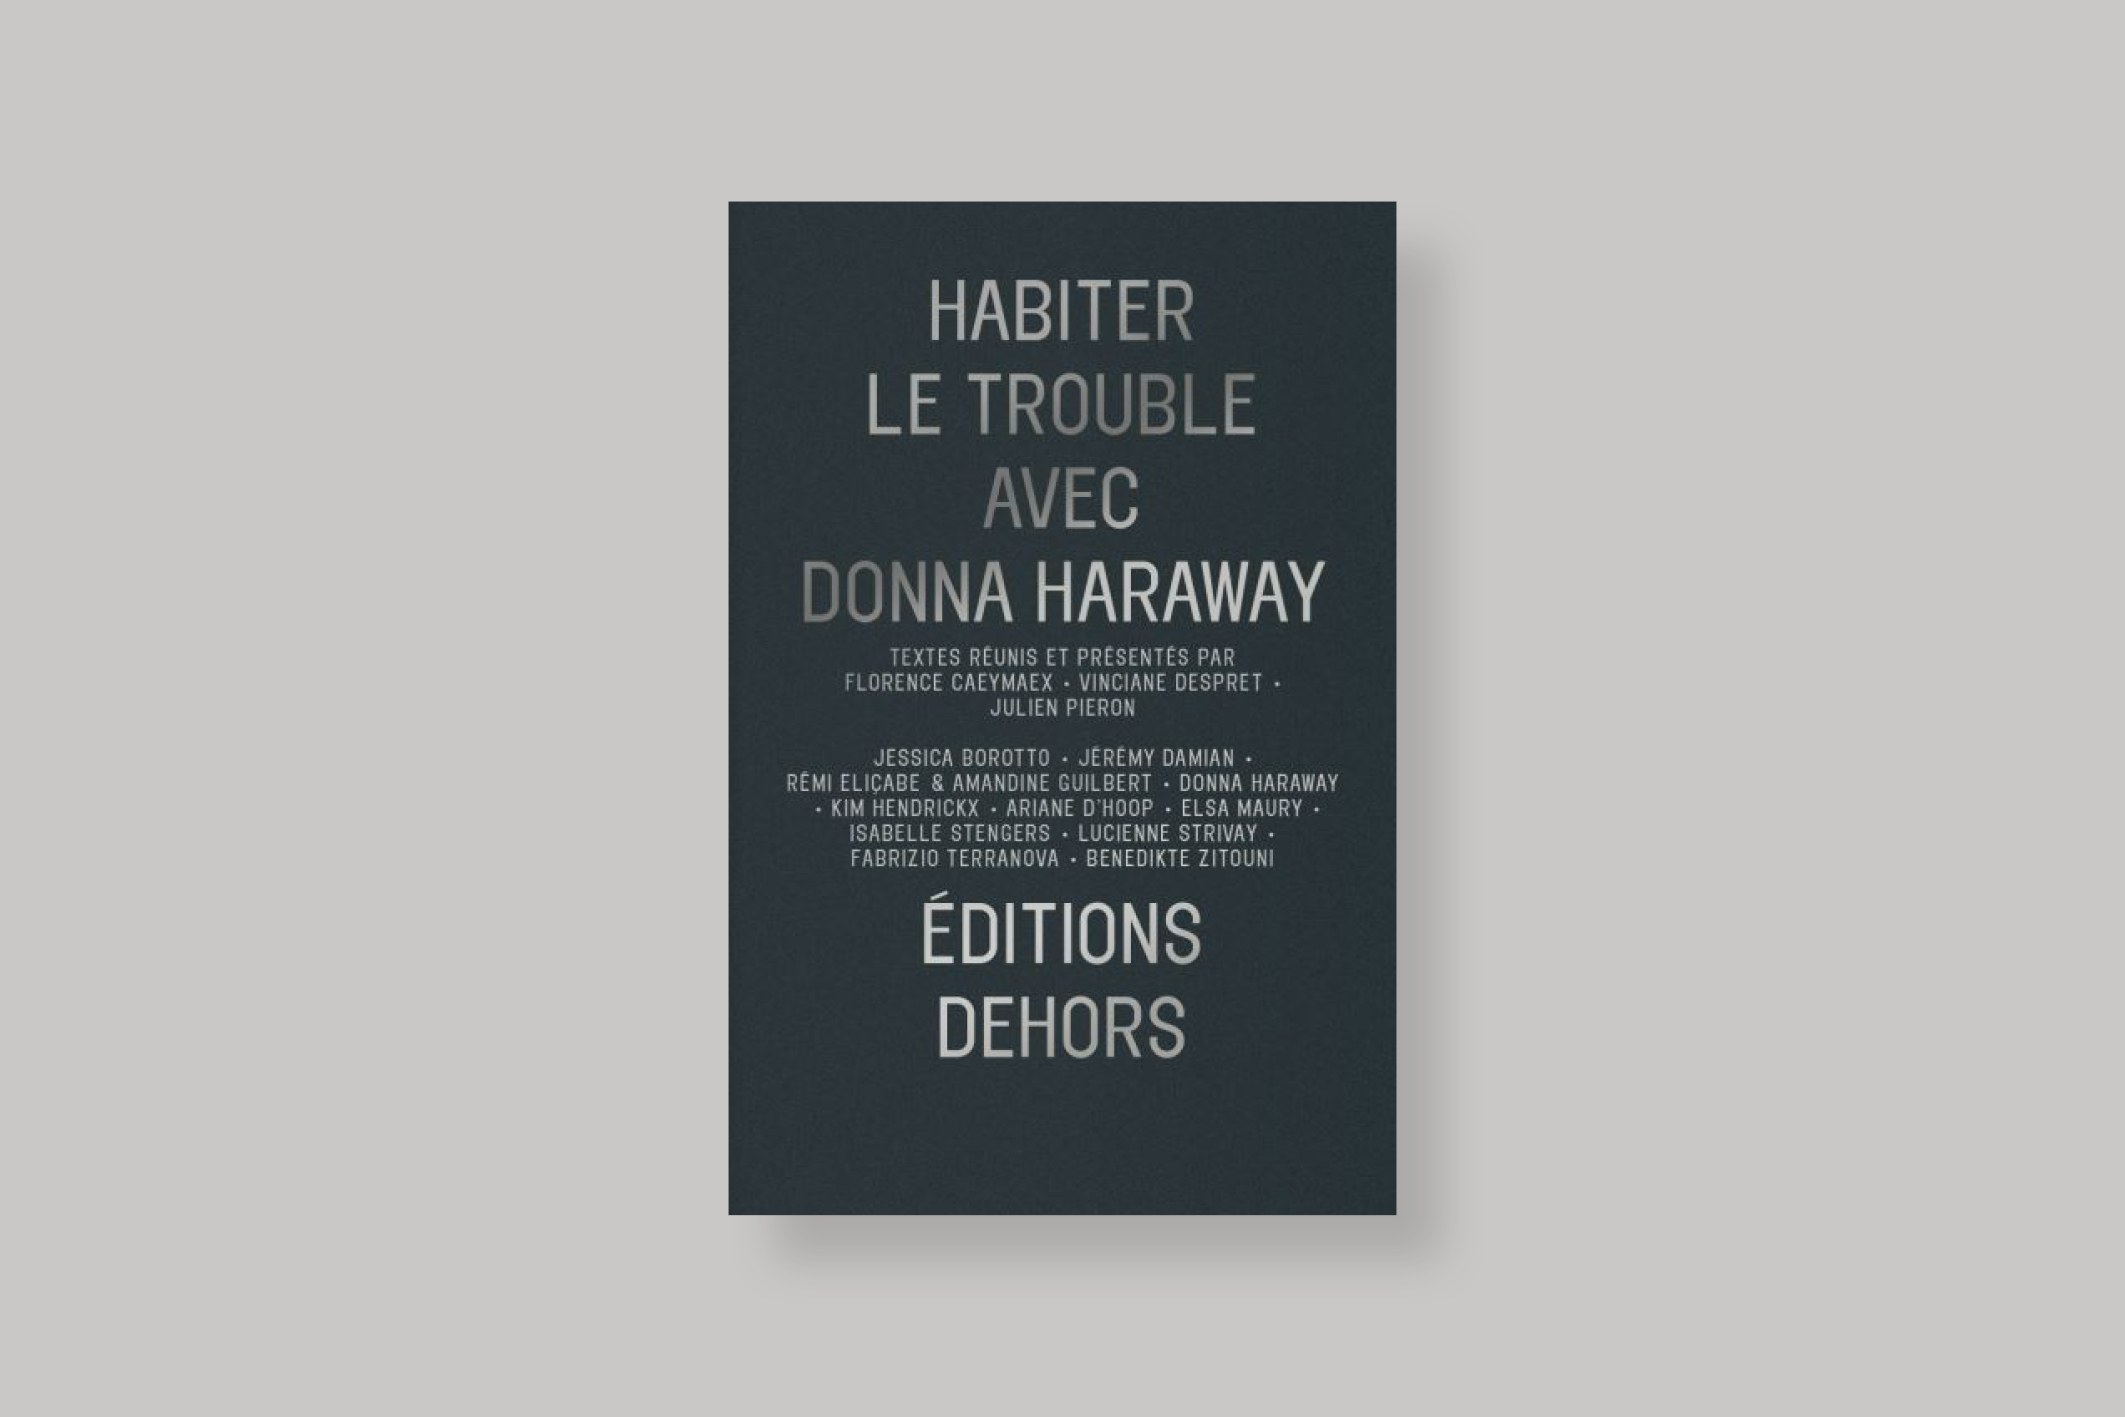 Habiter-le-trouble-avec-donna-haraway-editions-dehors-cover